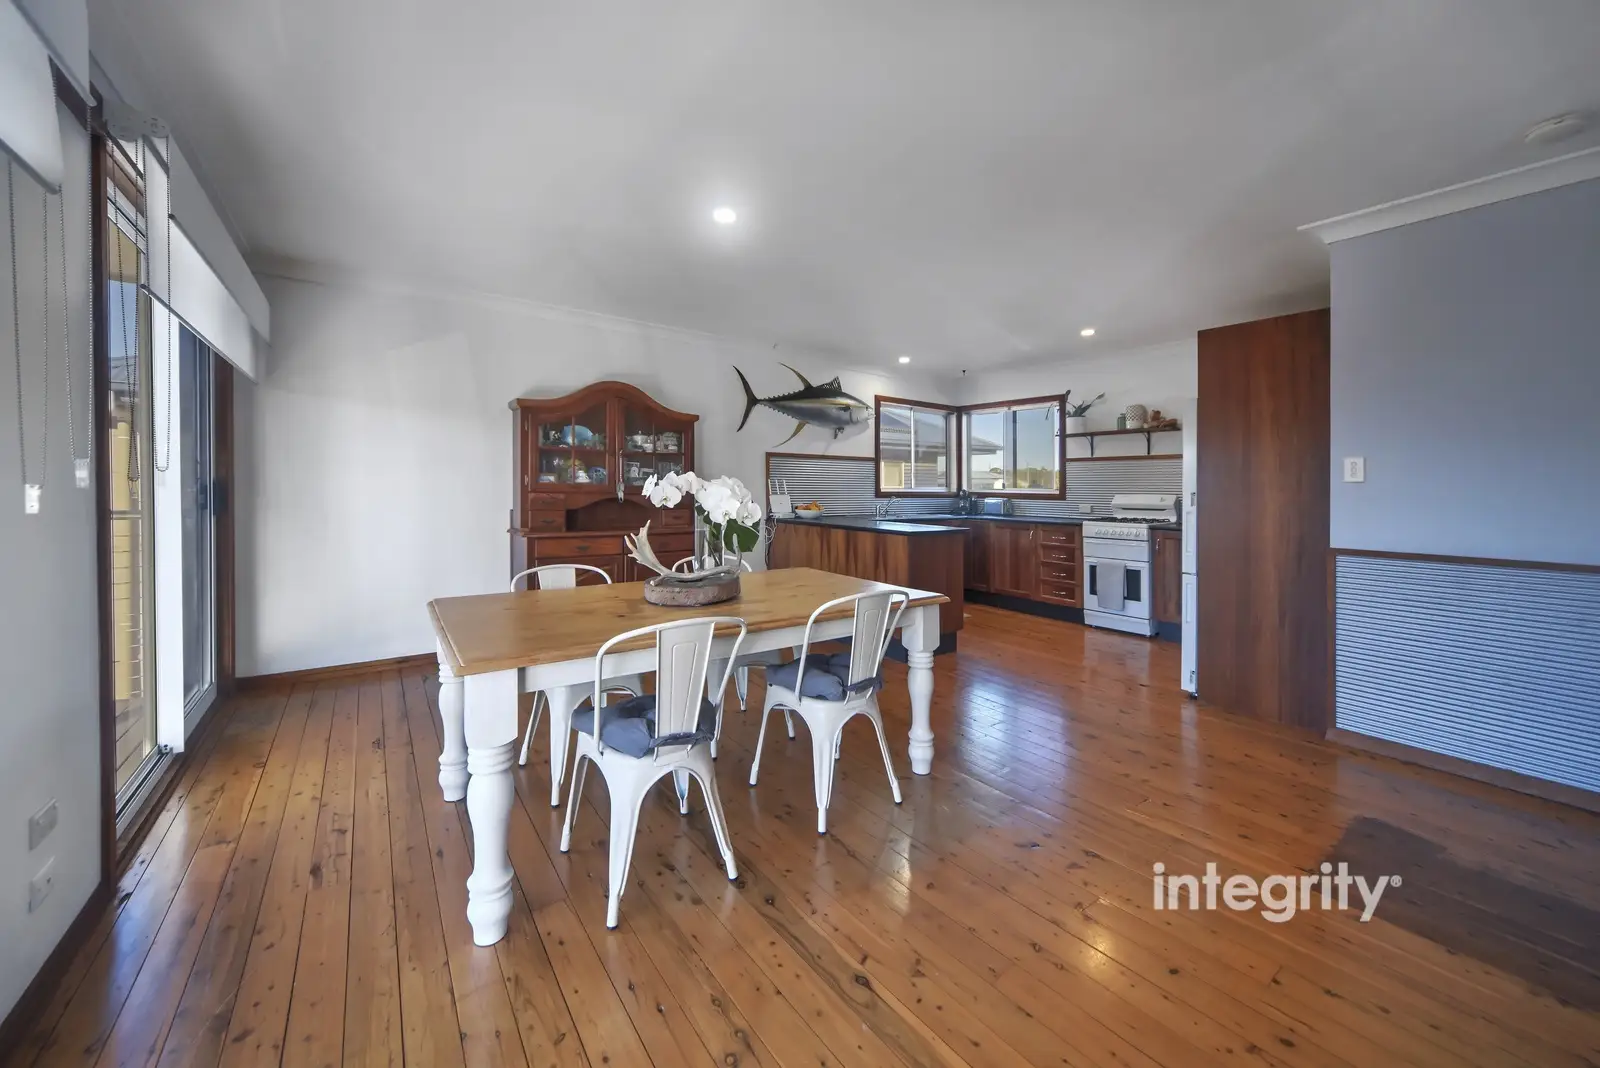 21 Haiser Road, Greenwell Point For Sale by Integrity Real Estate - image 3